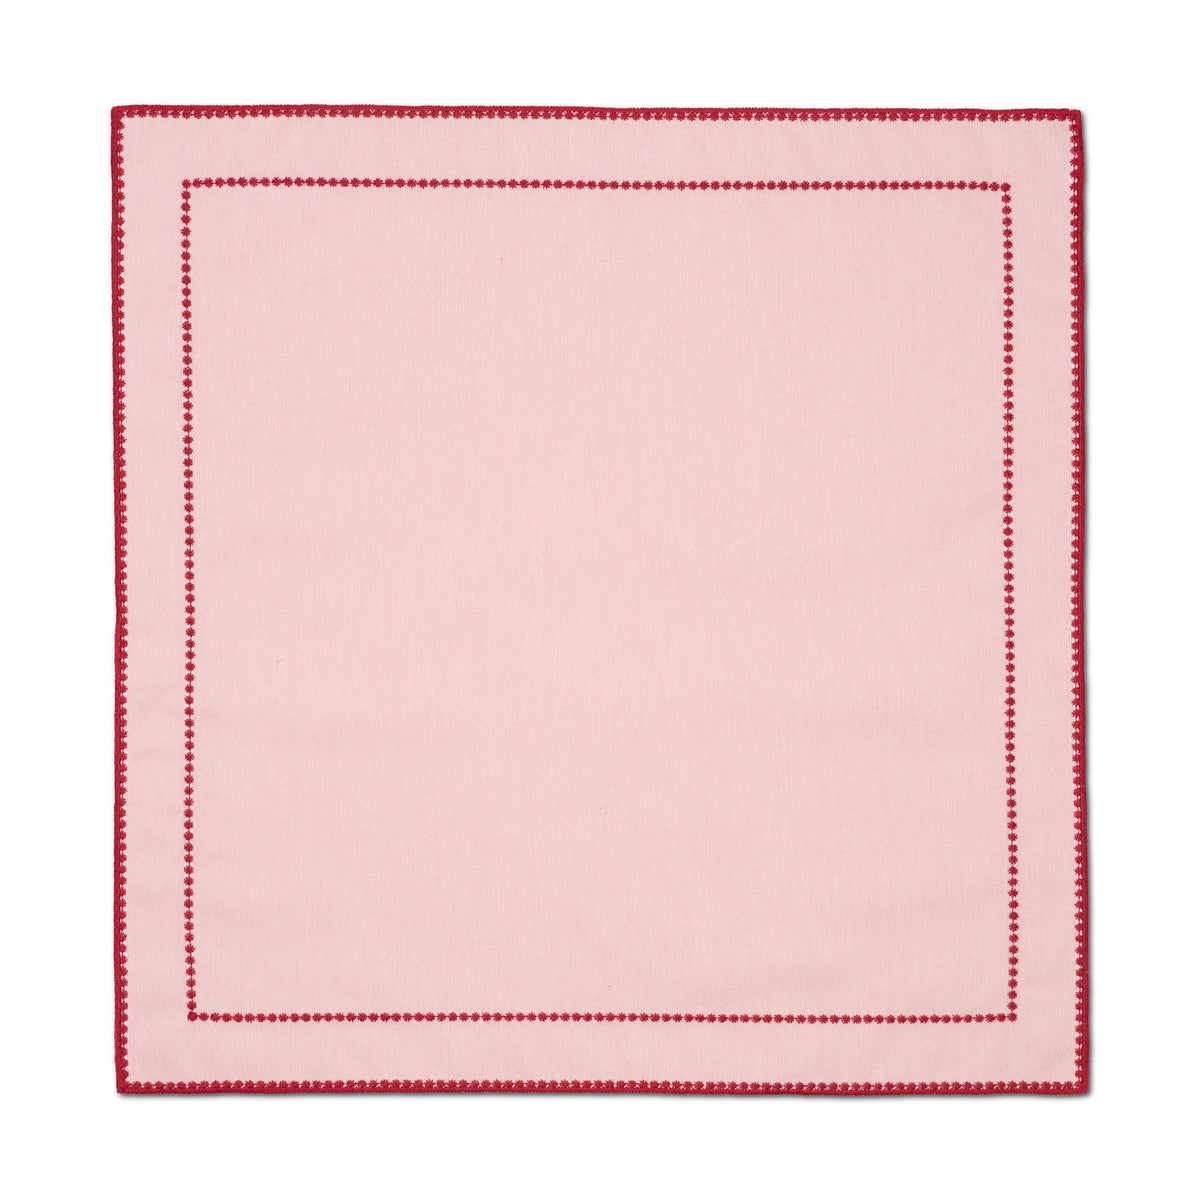 White Pearl Napkin in Pink Red, Set of 4